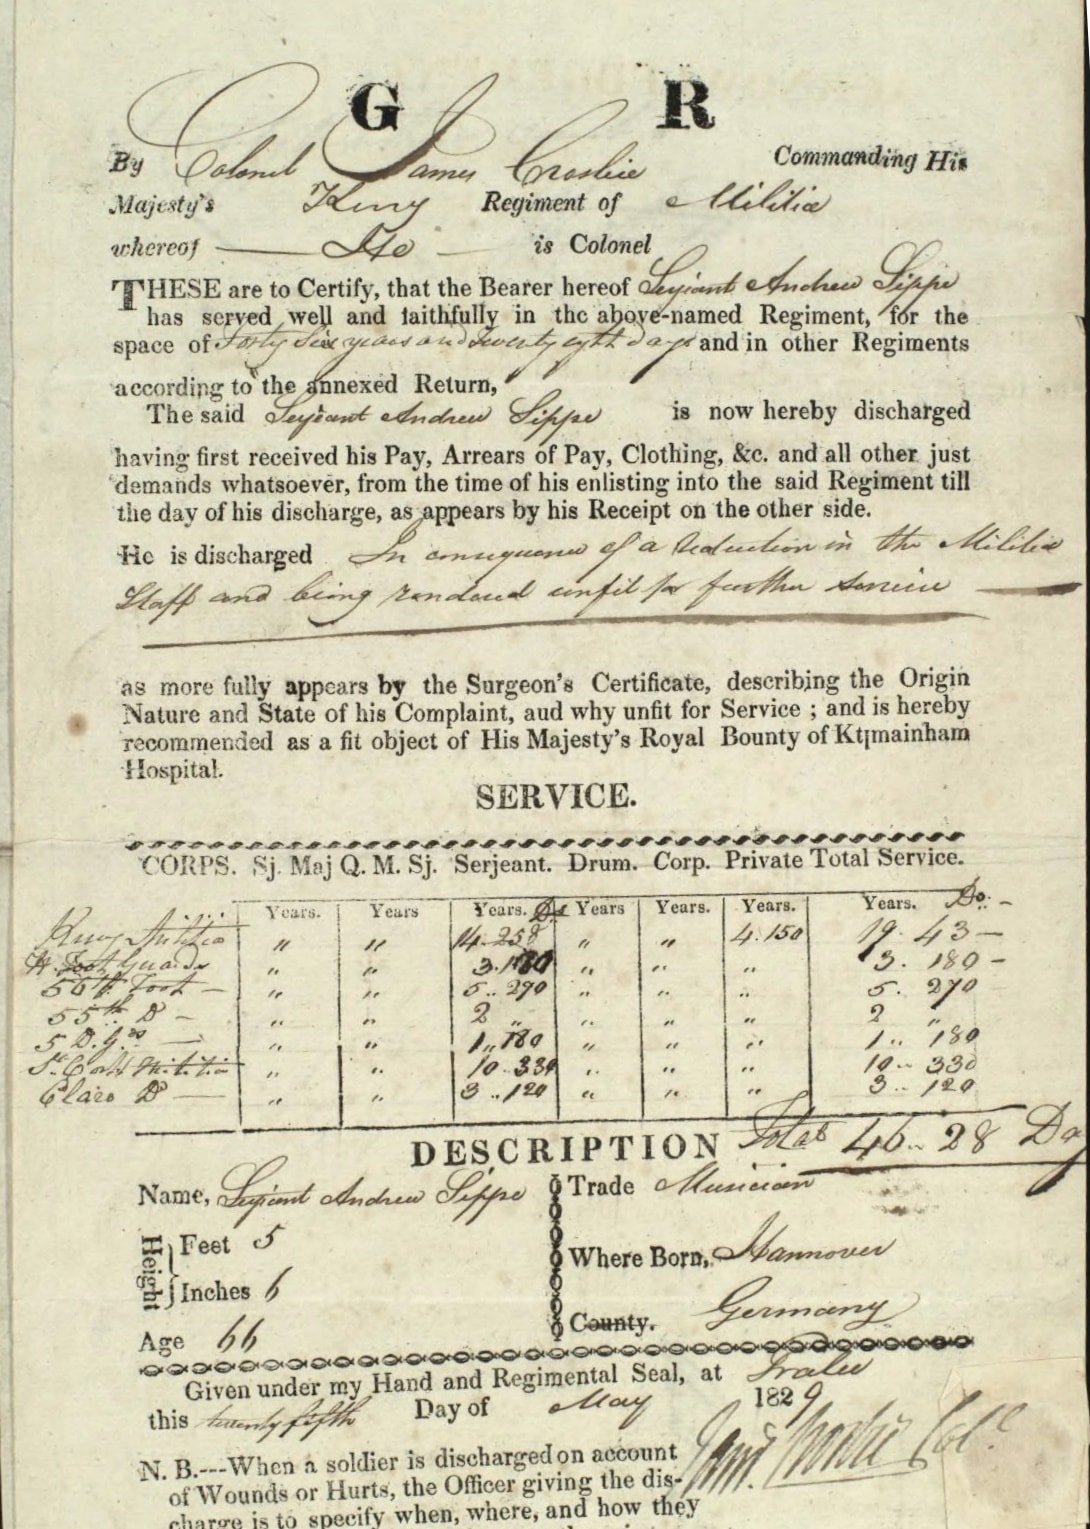 Discharge, Andrew Sippe, 25 May 1829; UK National Archives, WO 1108/179/1